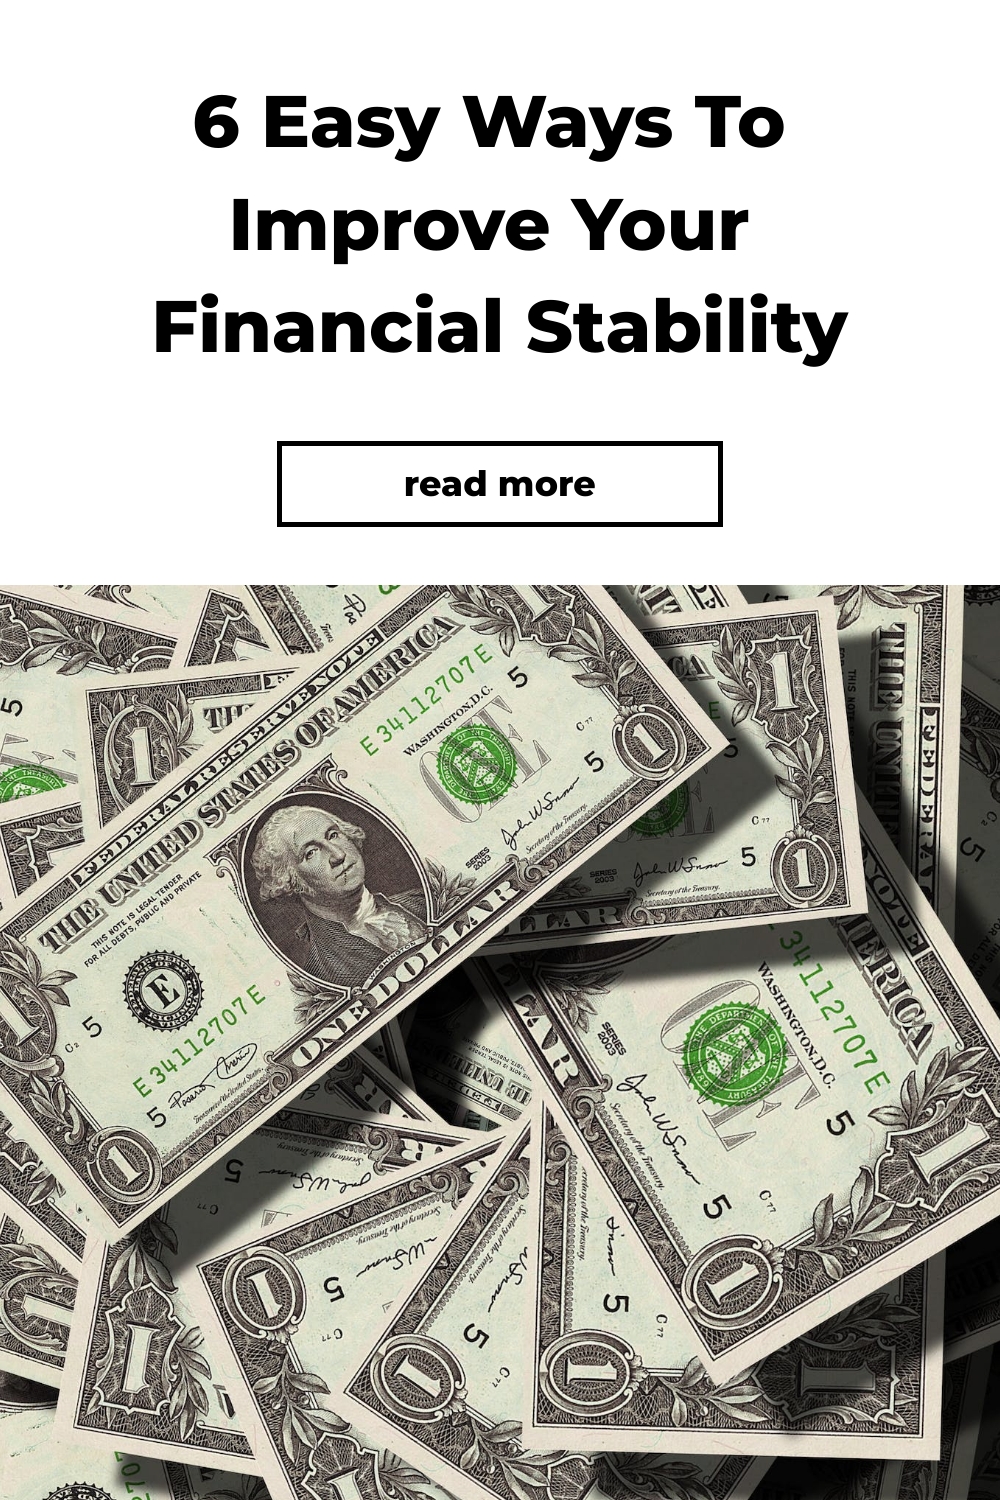 6 Easy Ways To Improve Your Financial Stability